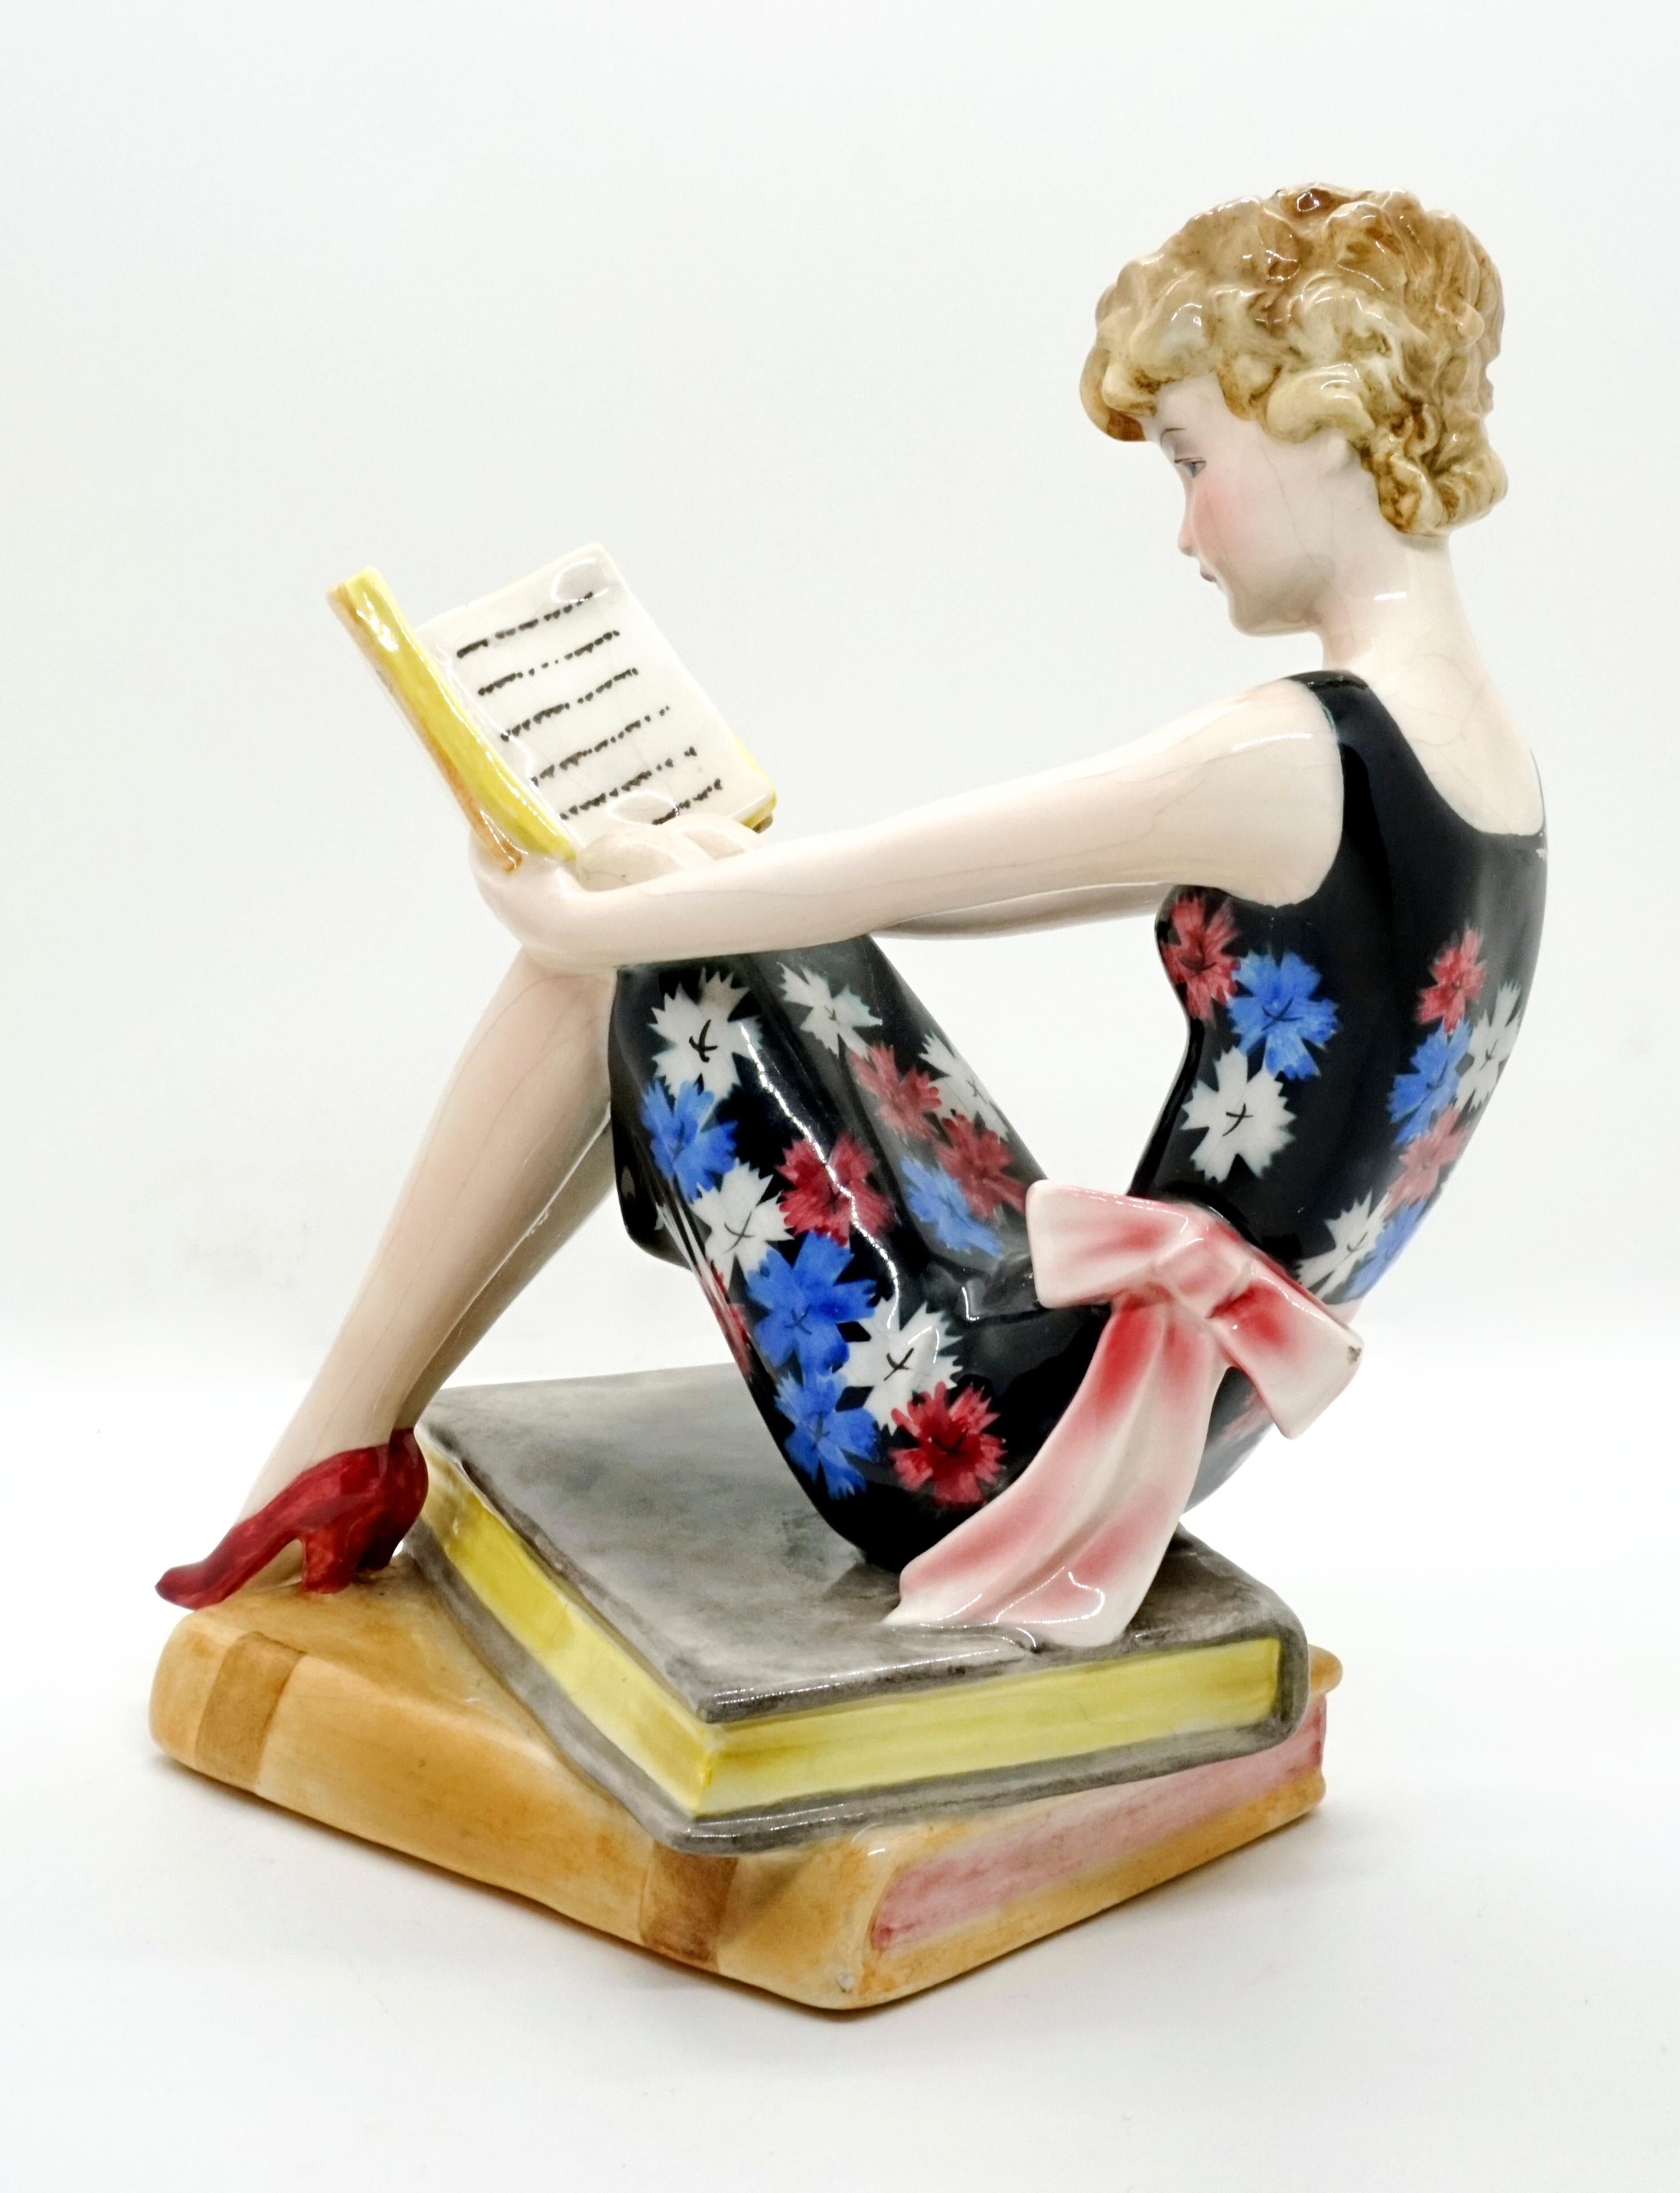 Very rare goldscheider Art Deco ceramic figurine.
A young lady with blond curly hair, a flowered summer dress and a large bow around her waist, is sitting on a pile of large books that also serves as a pedestal, reading a book, which she is holding